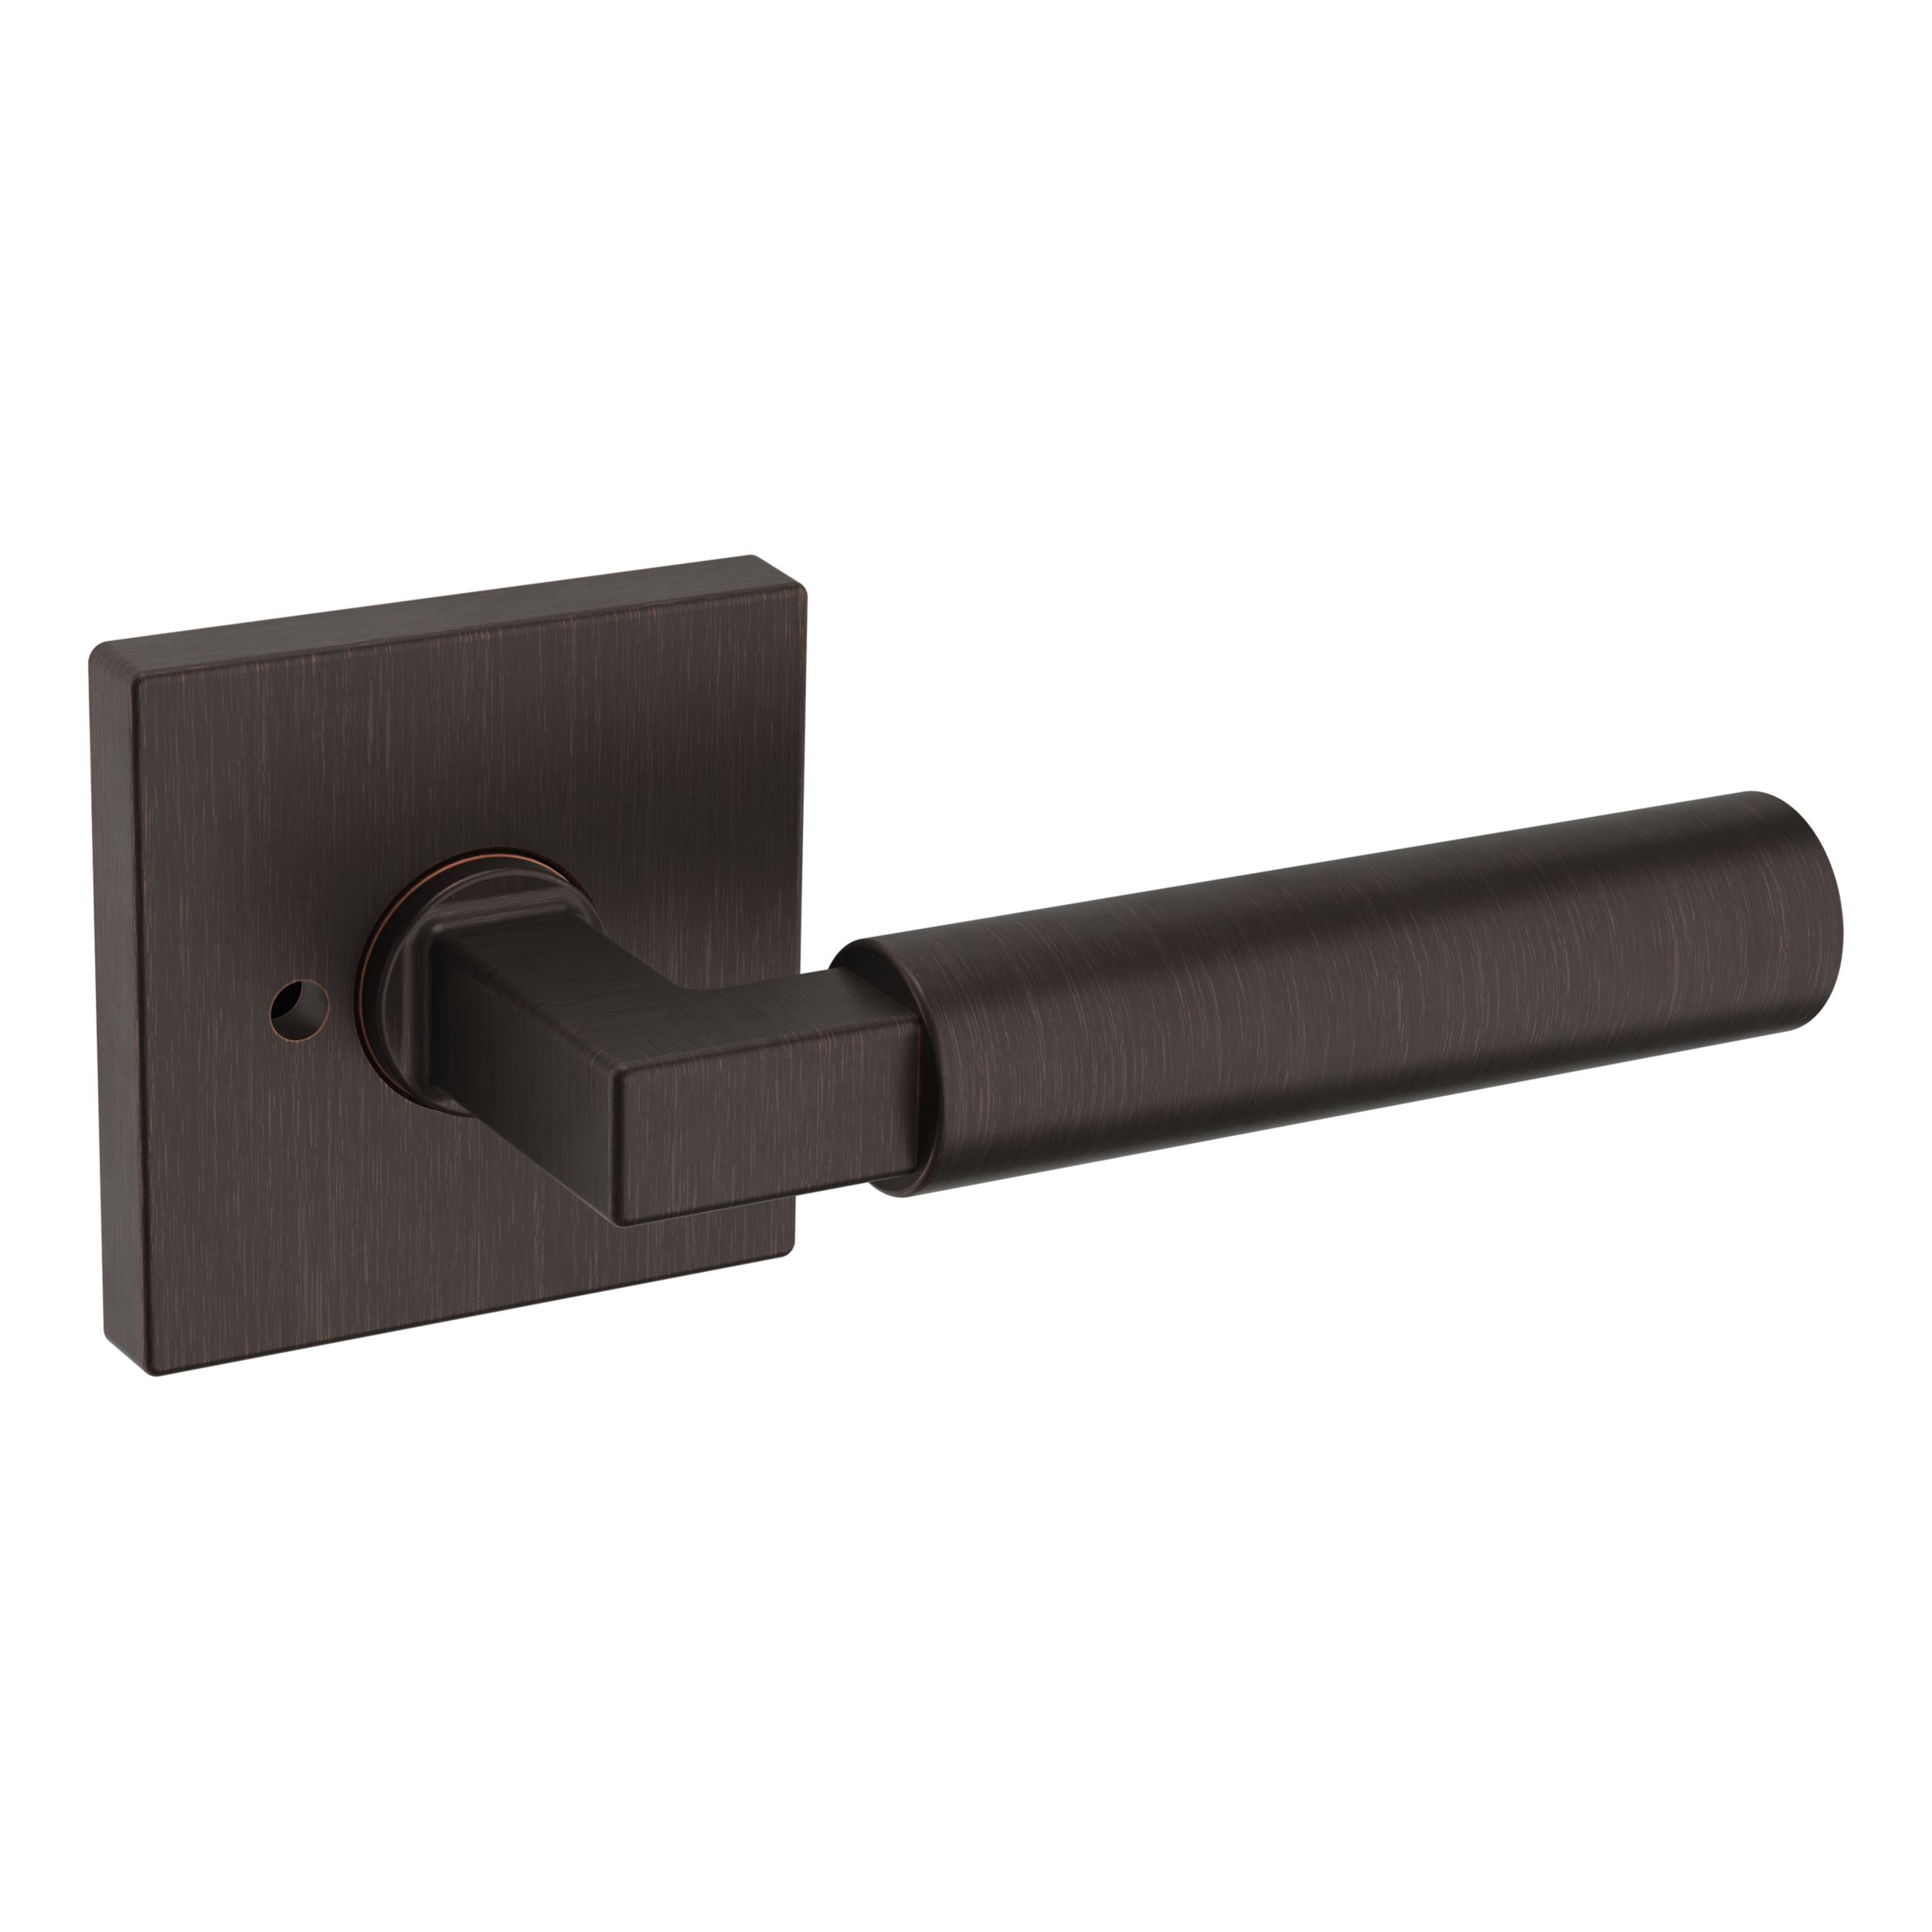 L029 Gramercy Lever with R017 Rose- Privacy